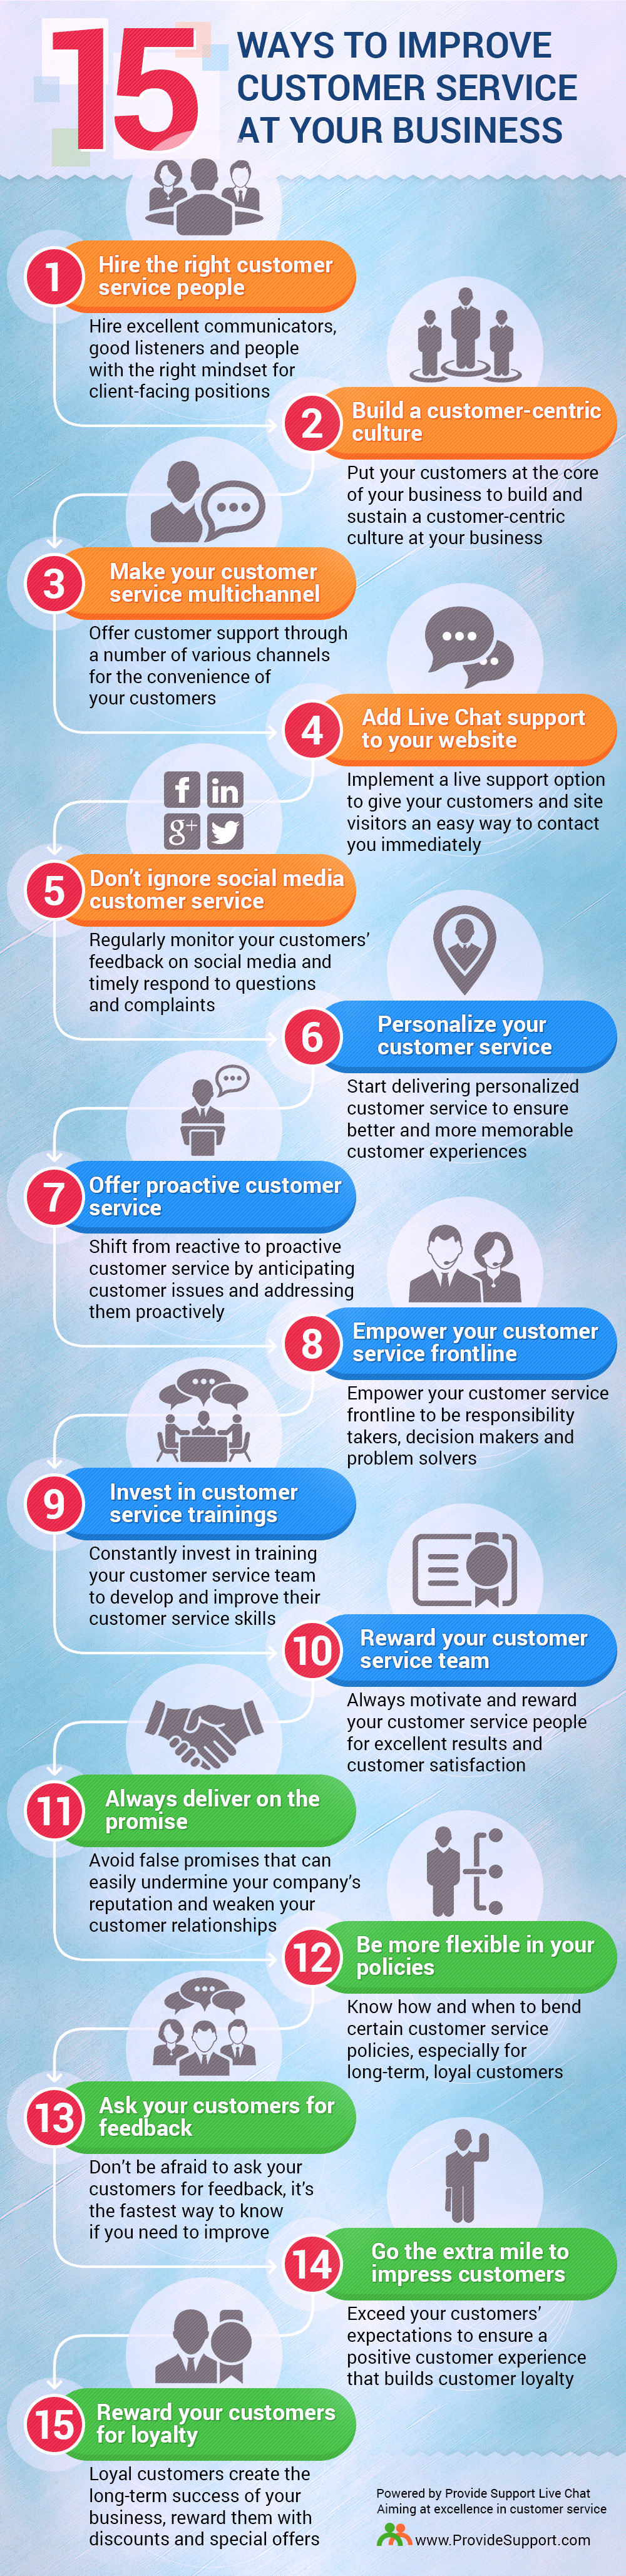 15 Ways to Improve Customer Service at Your Business